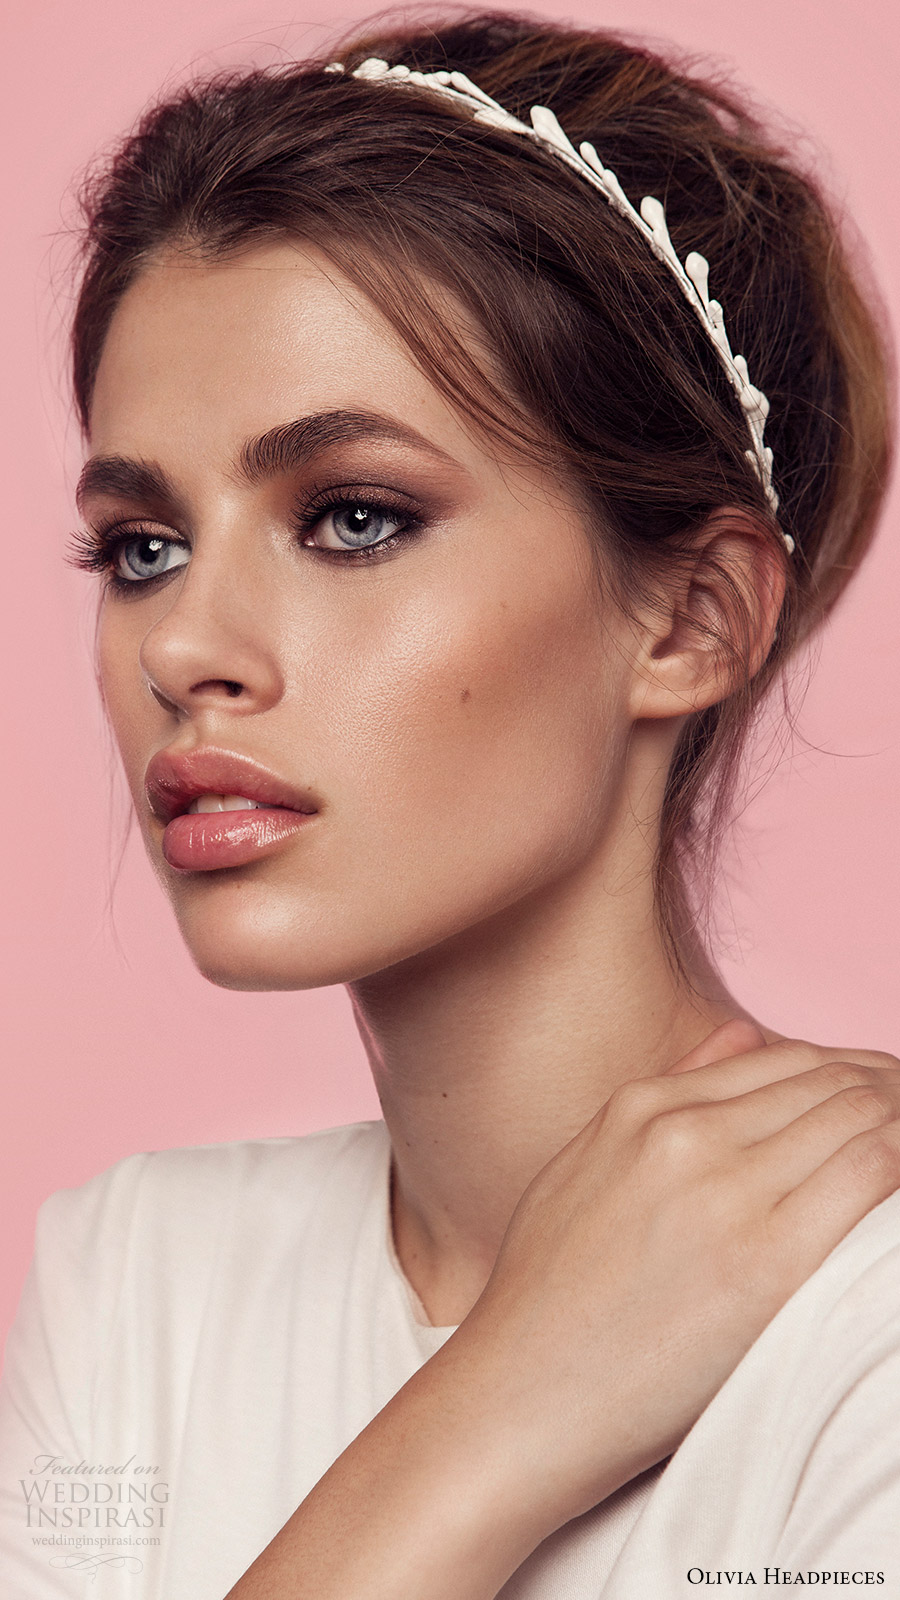 olivia headpieces 2017 bridal hair accessories troublemaker halo